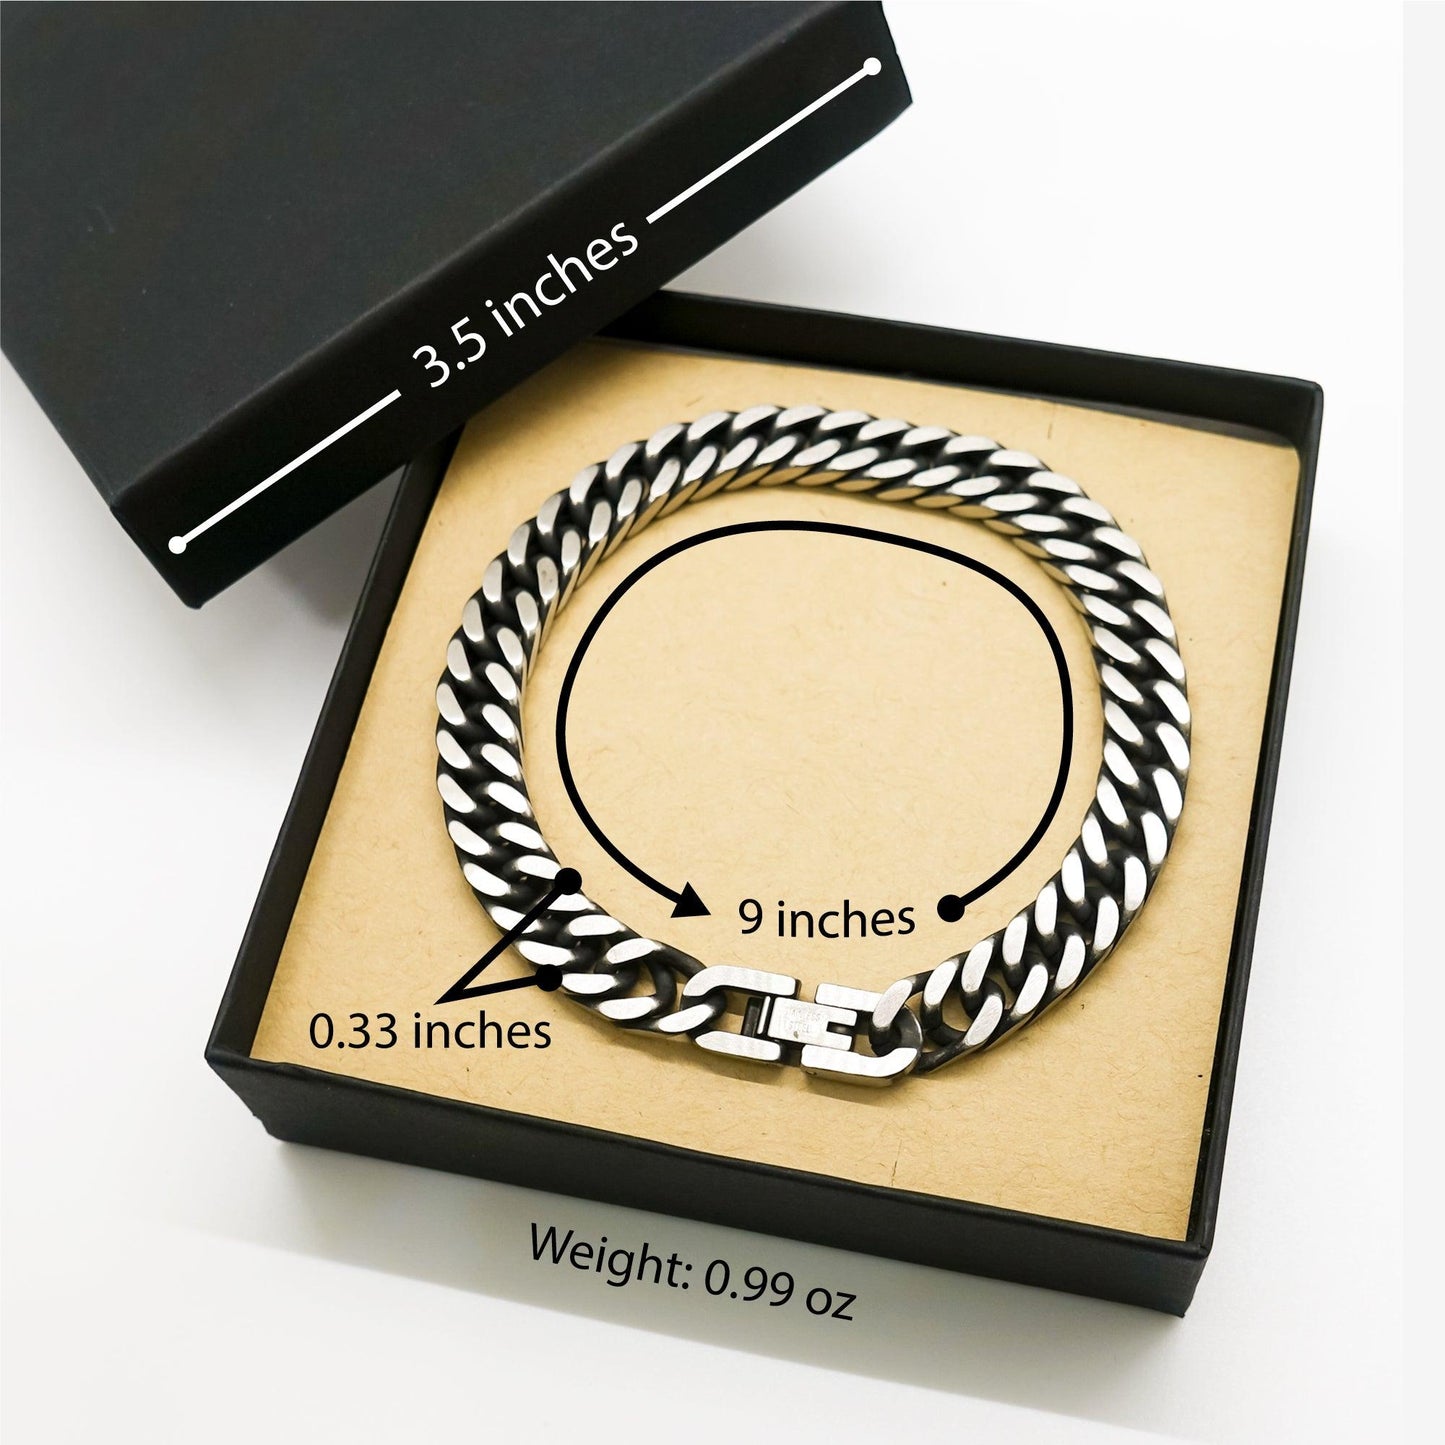 Remarkable Apartment Manager Gifts, Your dedication and hard work, Inspirational Birthday Christmas Unique Cuban Link Chain Bracelet For Apartment Manager, Coworkers, Men, Women, Friends - Mallard Moon Gift Shop